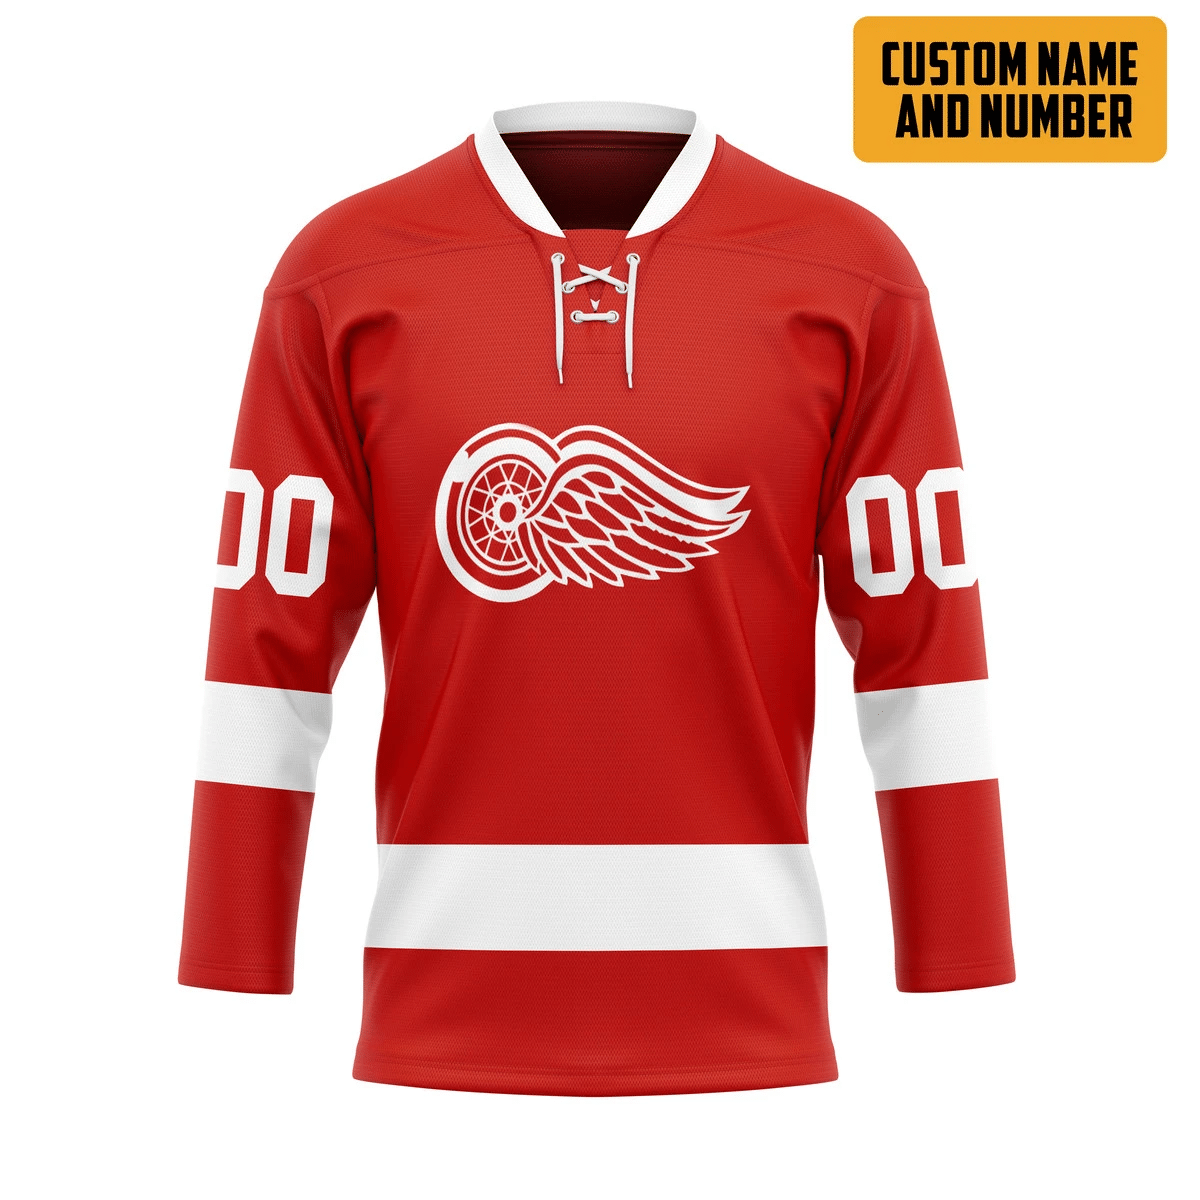 Top cool Hockey jersey for fan You can buy online. 10